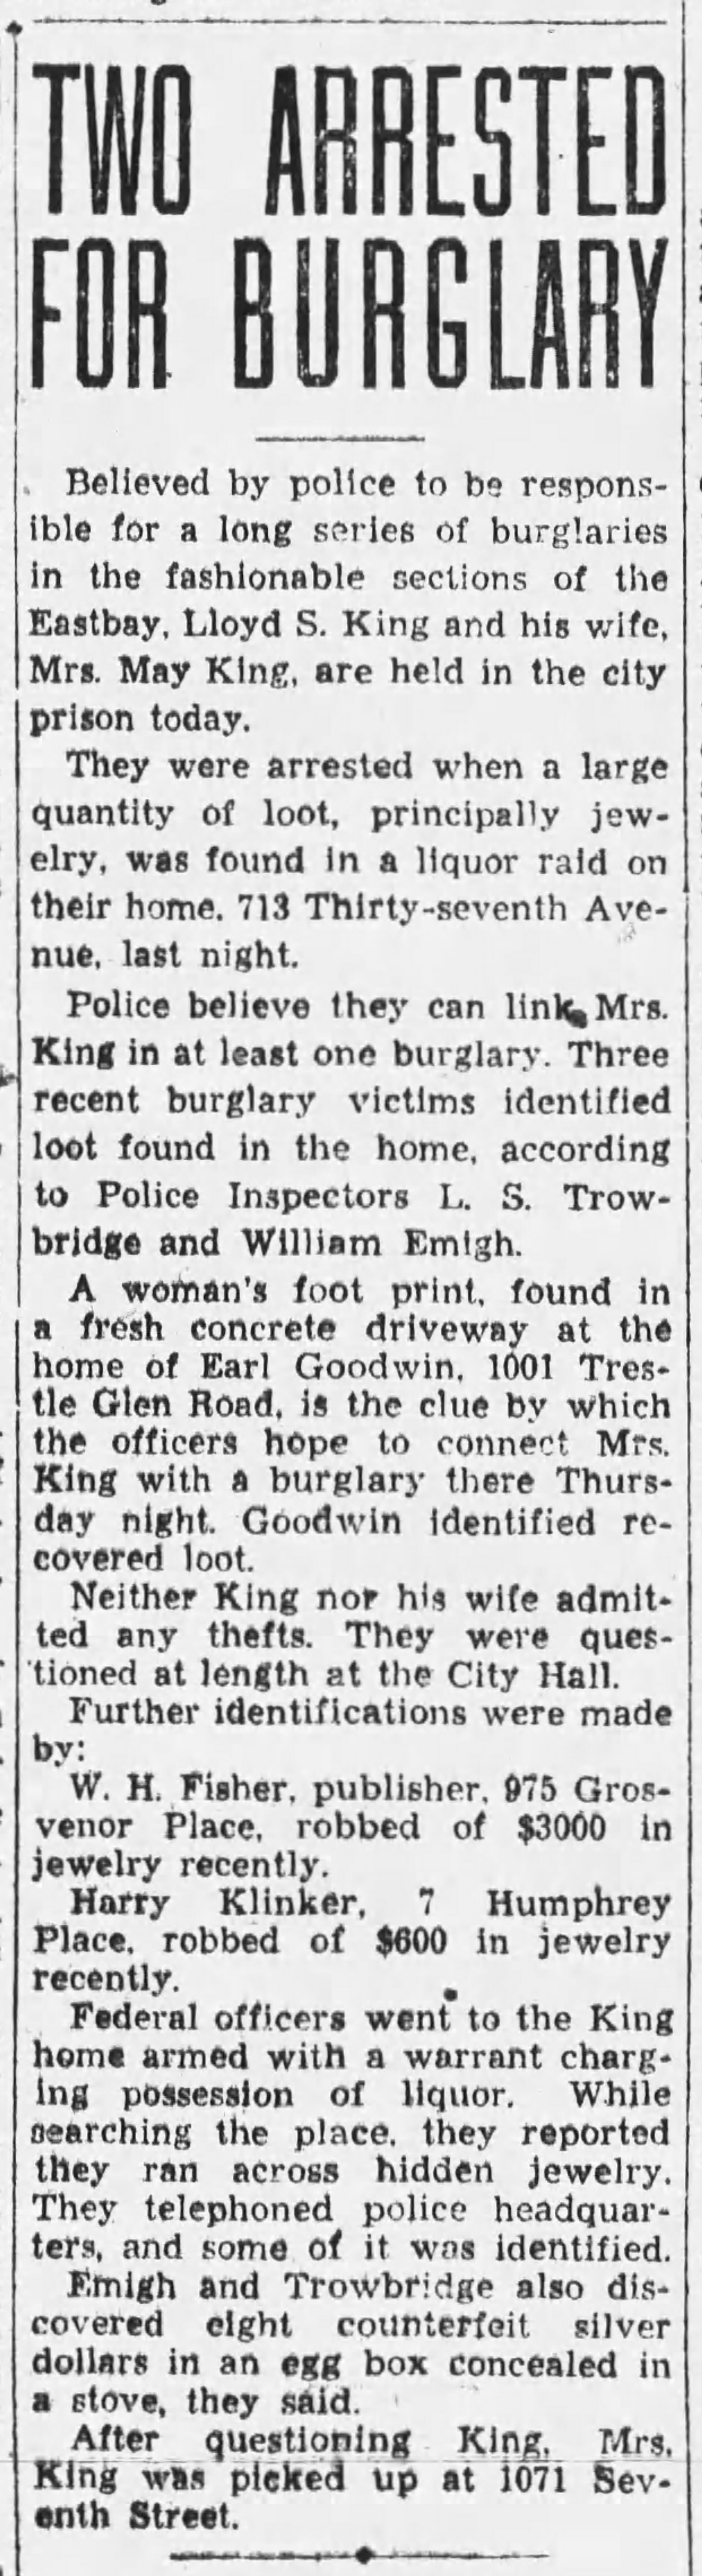 Article about the arrests of Lloyd and May King for burglary